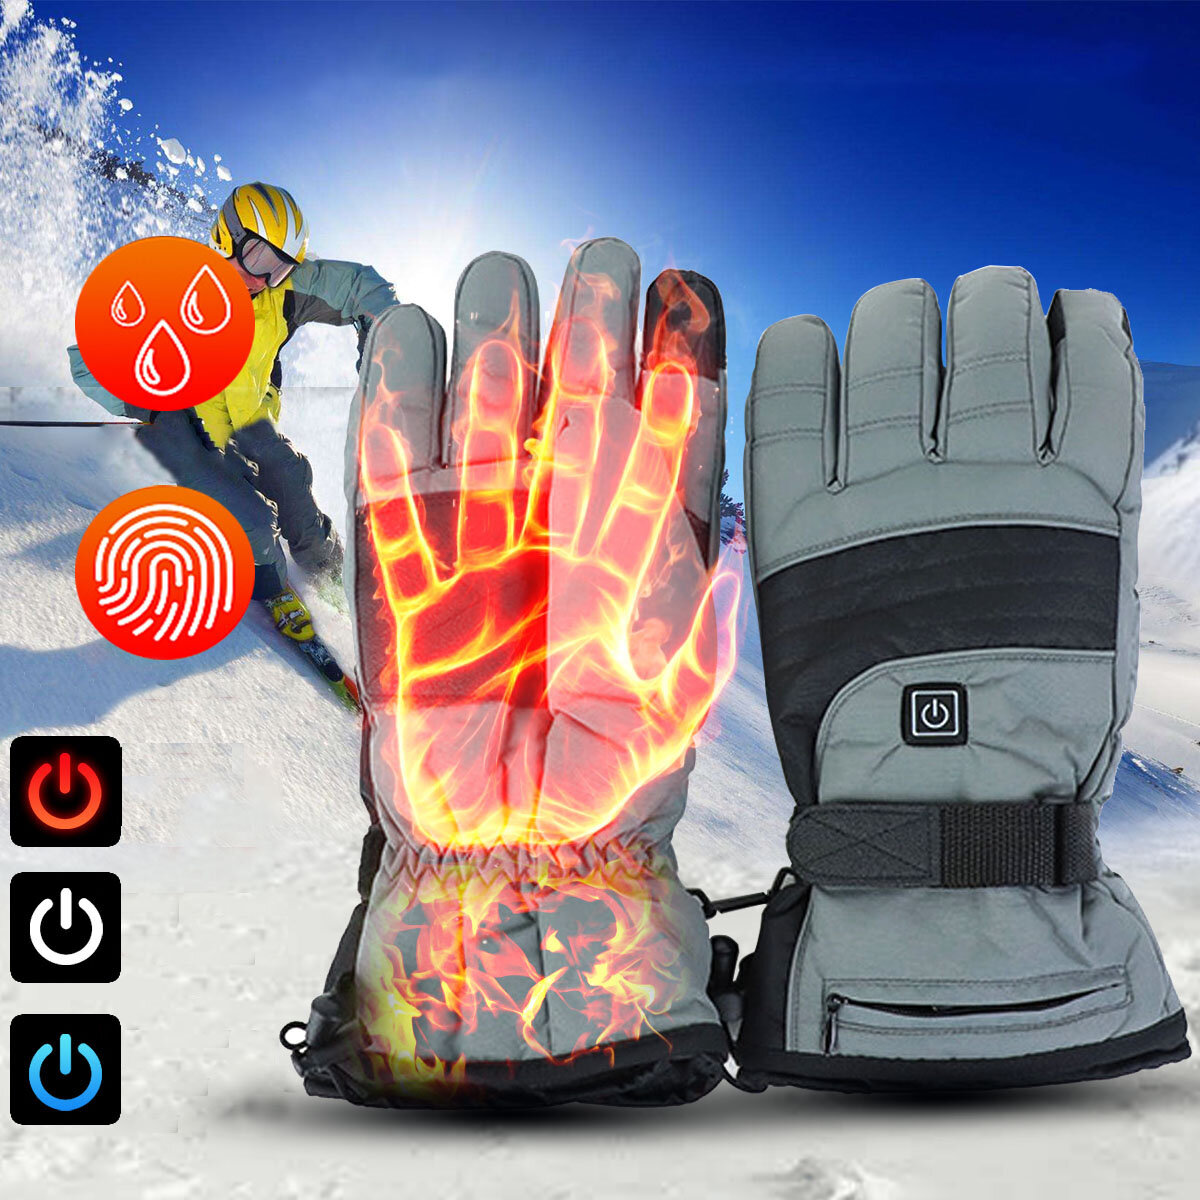 

3 Modes Heated Gloves Winter Warmers Thermal Touch Screen Windproof Waterproof Skiing Cycling Riding Gloves